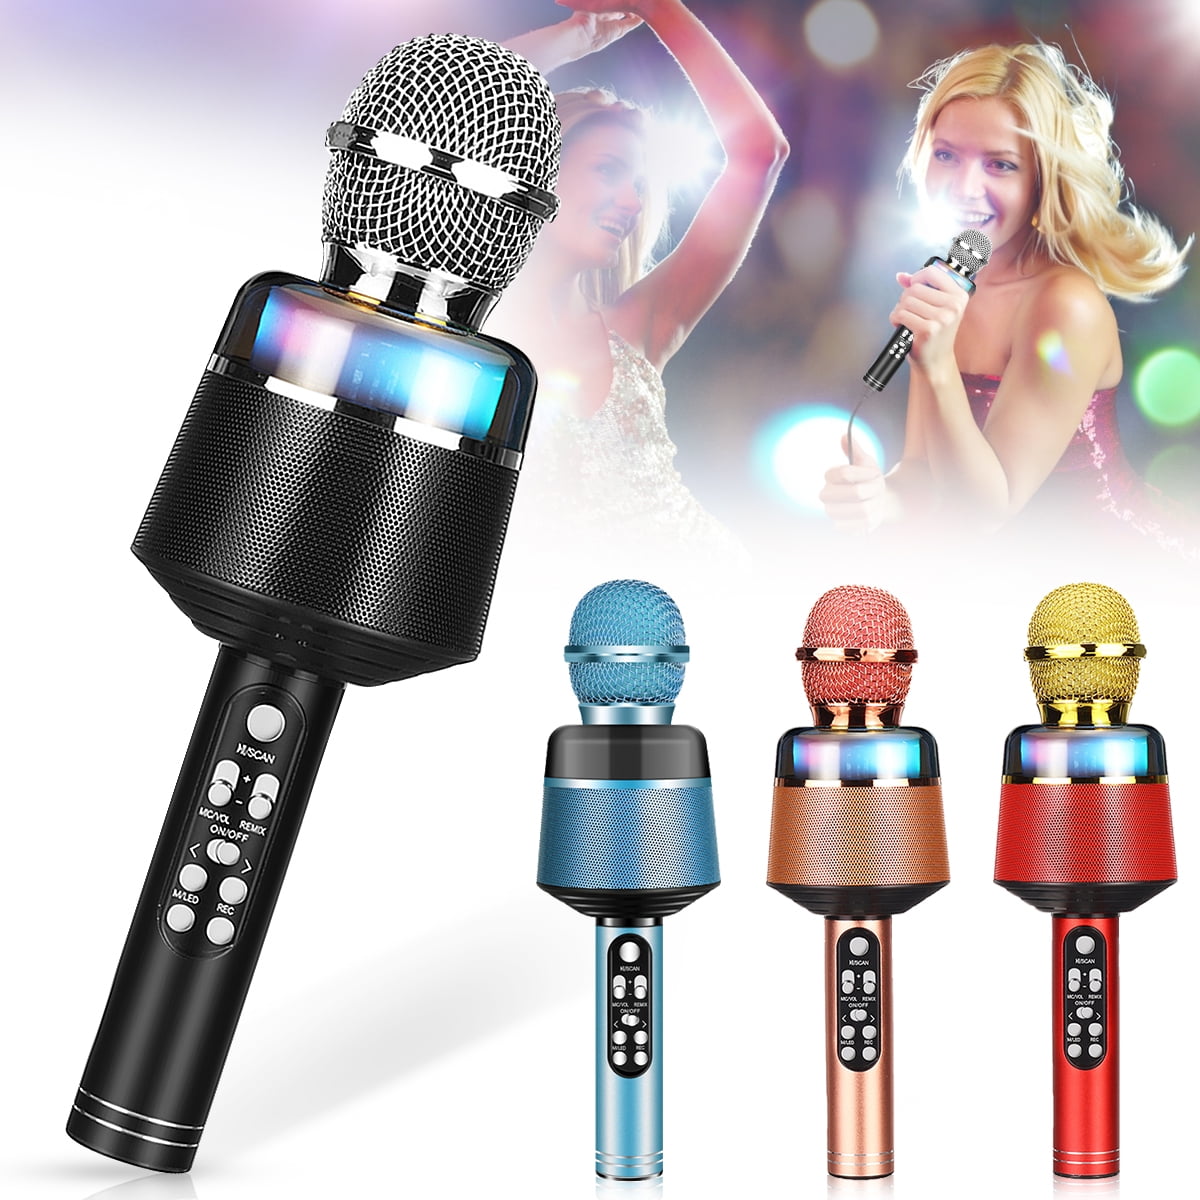 Presentation Halls and Wherever You Want. BDK Entertainment 8 Wireless Microphone- Also Used as FM Radio with Rechargeable Battery Very Easy to use in Any Situation-at The Beach,Home School 